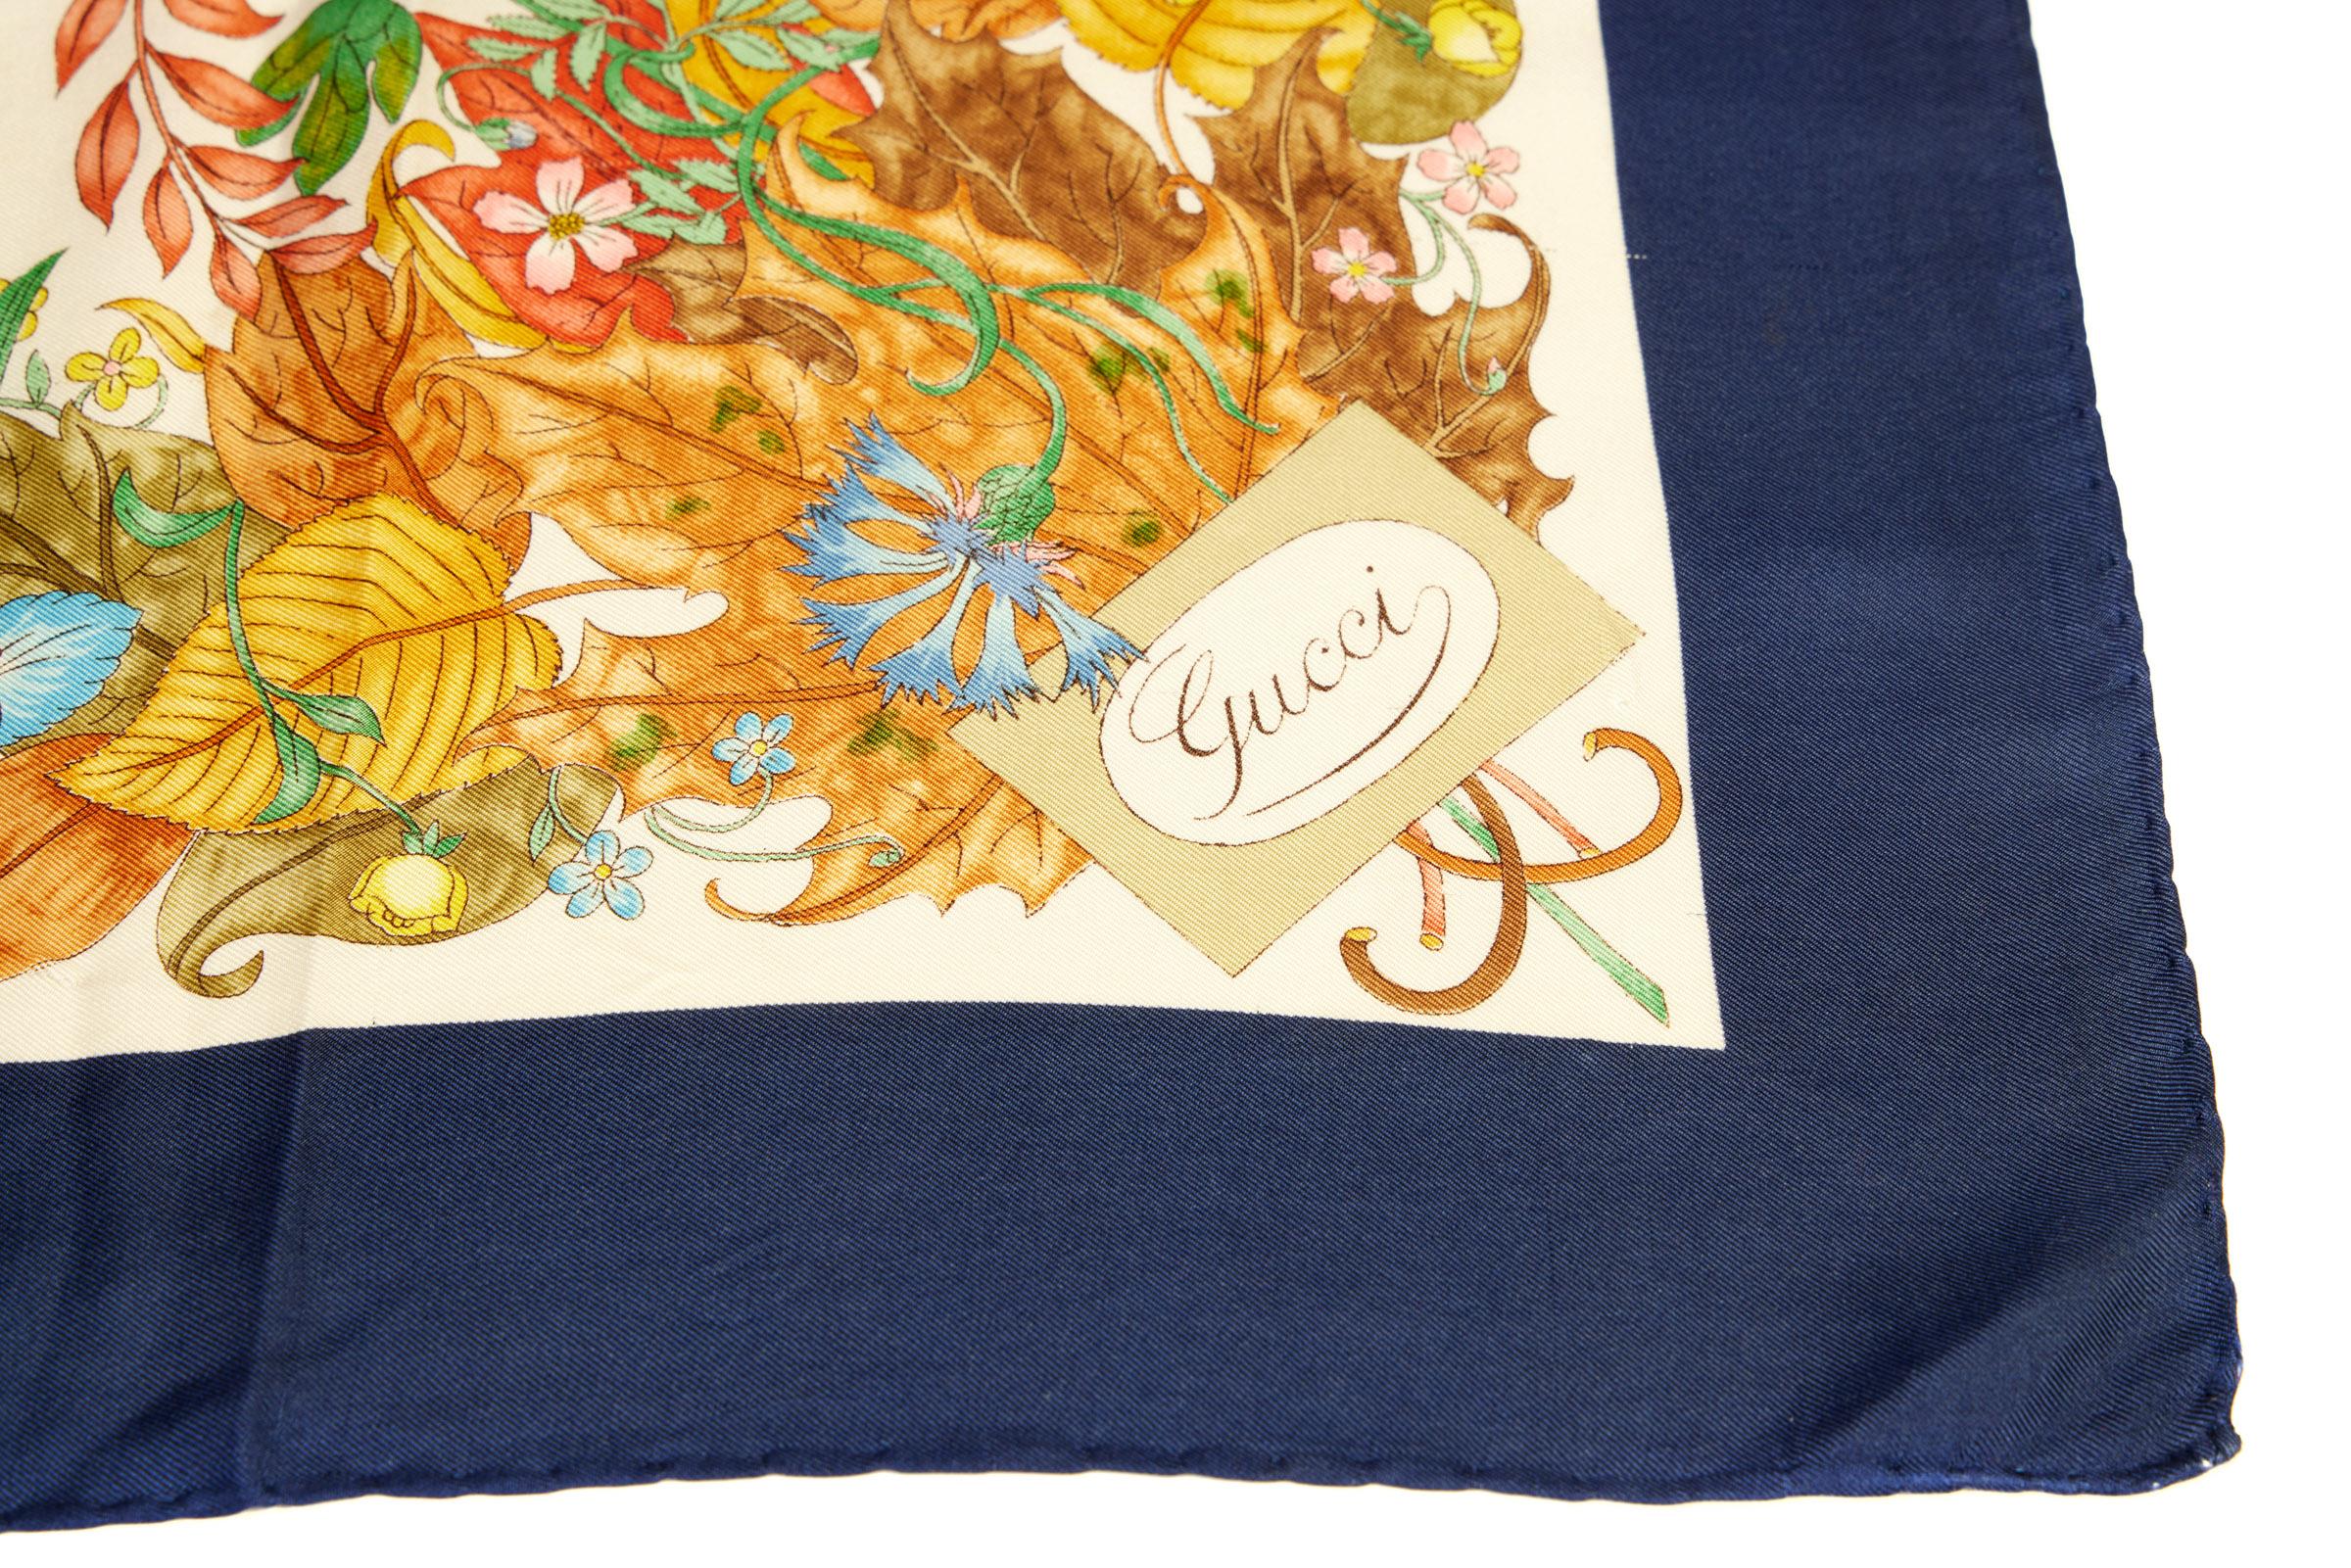 Gucci collectible Accornero flower silk scarf, blue trim.Minor stains, please refer to photos. Hand rolled edges.